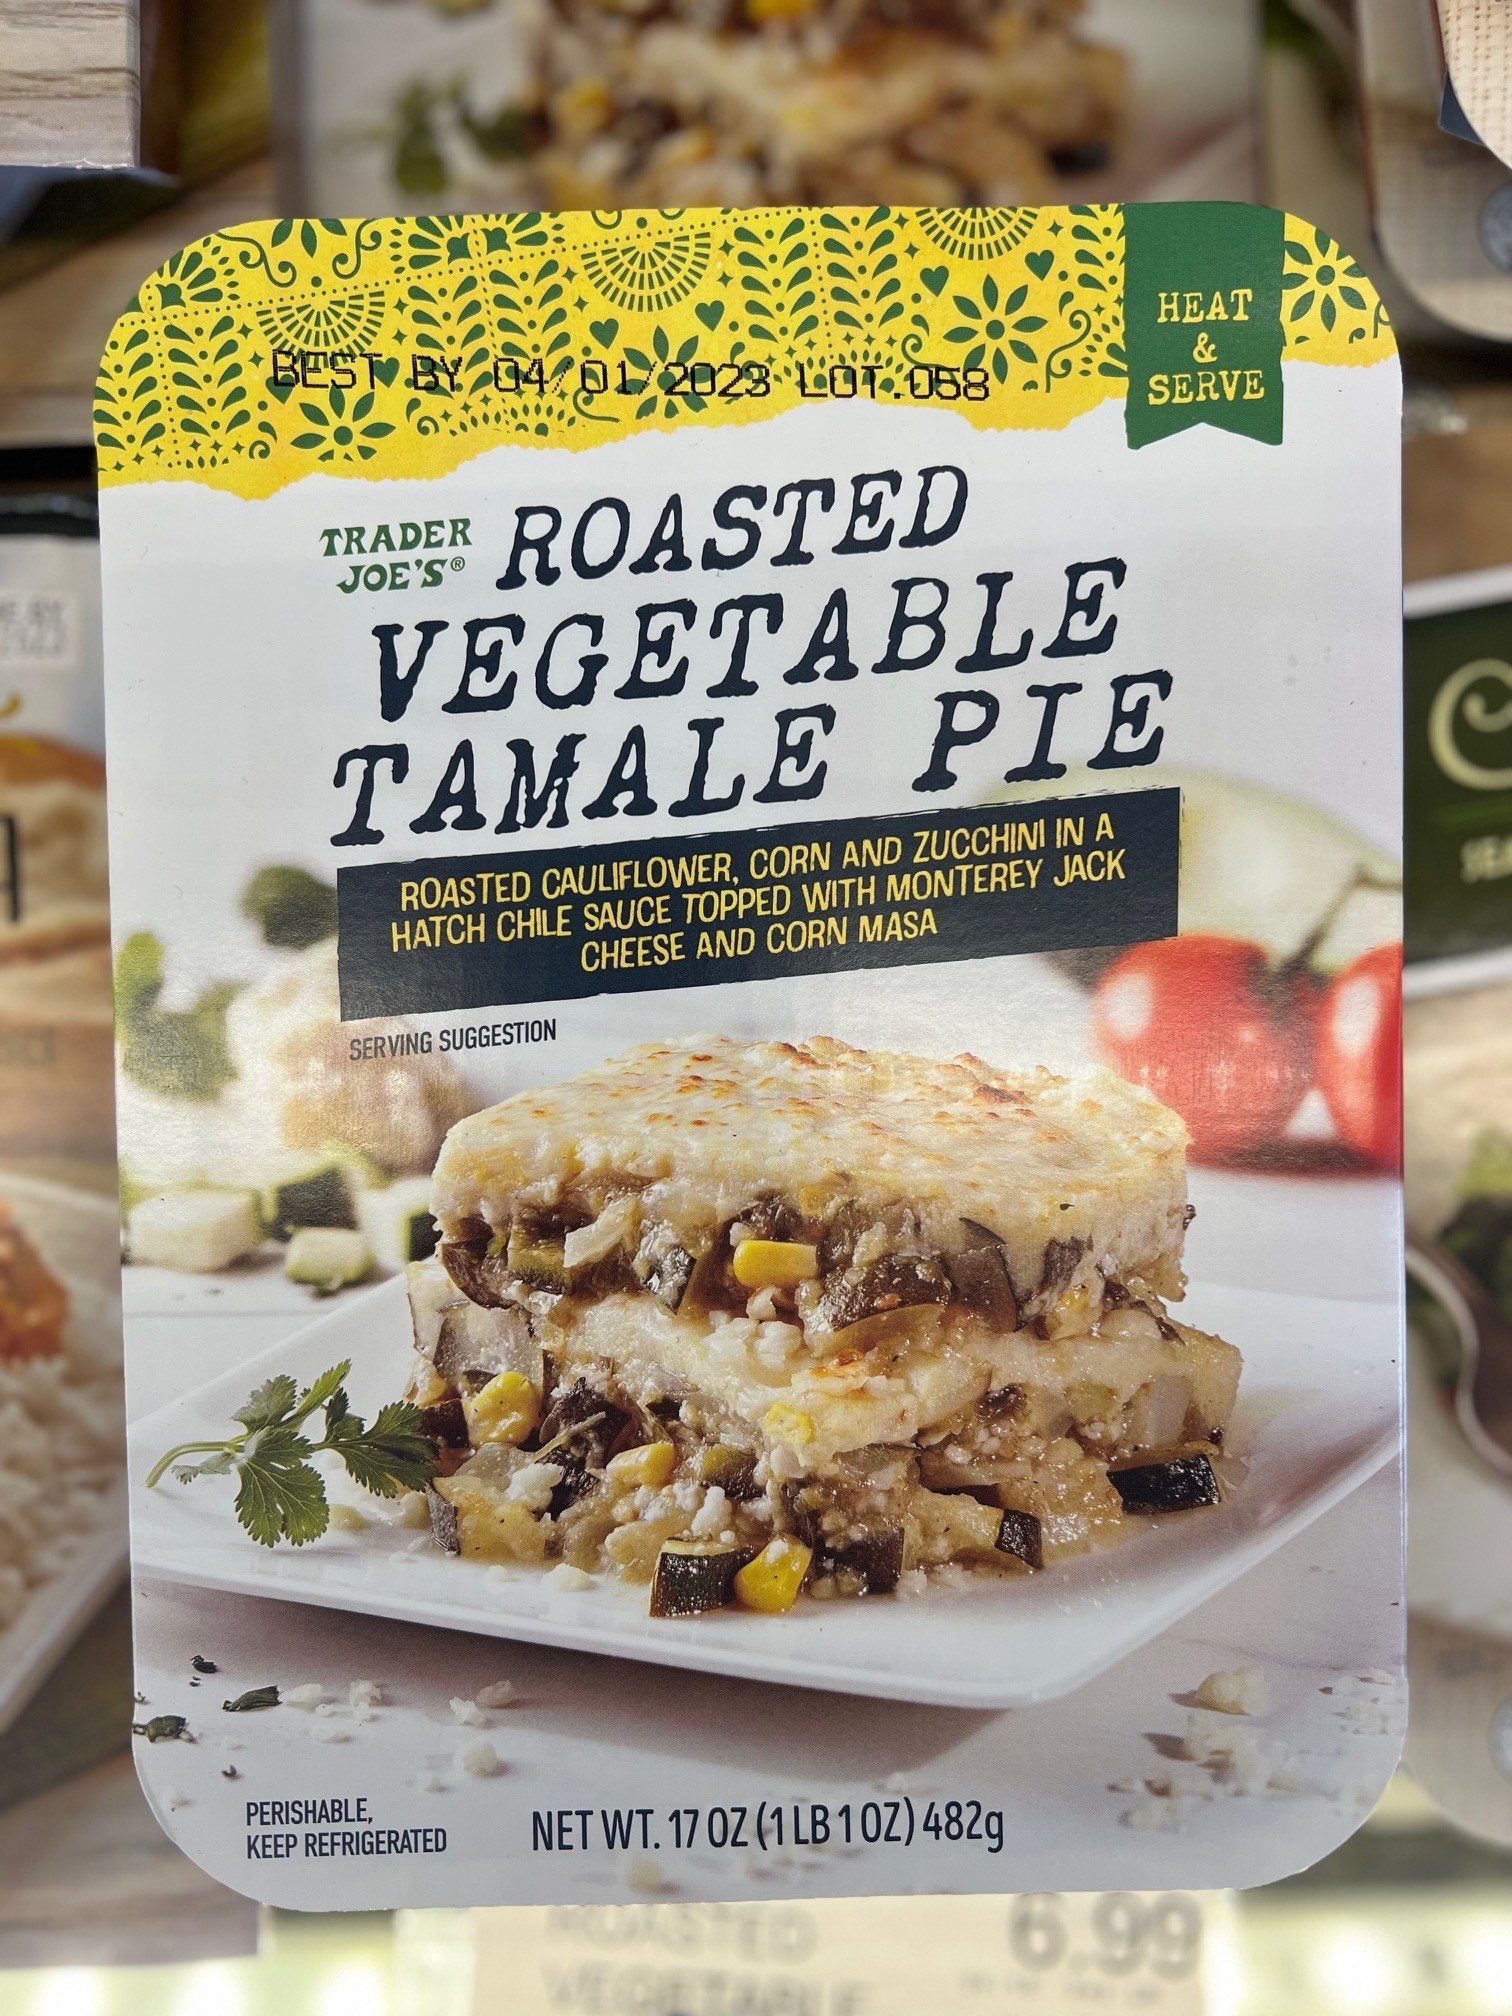 A package of Roasted Vegetable Tamale Pie: &quot;roasted cauliflower, corn and zucchini in a Hatch chile sauce topped with Monterey Jack cheese and corn masa&quot;